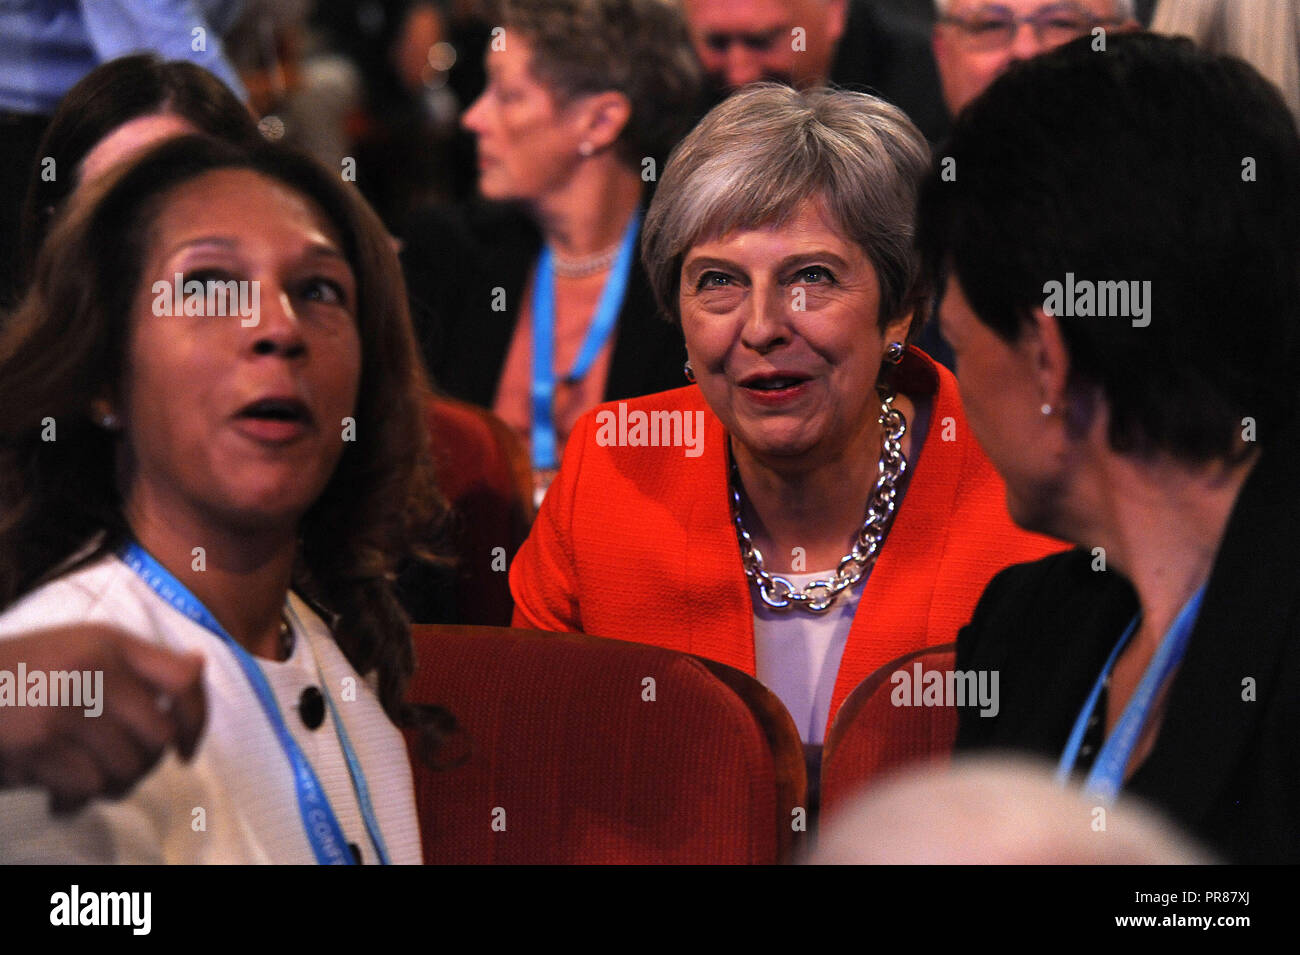 Birmingham, UK. 30th September, 2018.  Theresa May MP, Prime Minister and Leader of the Conservative Party, listening to opening speeches to conference, and talking to delegates, on the first session of the first day of the Conservative Party annual conference at the ICC.  Kevin Hayes/Alamy Live News Stock Photo